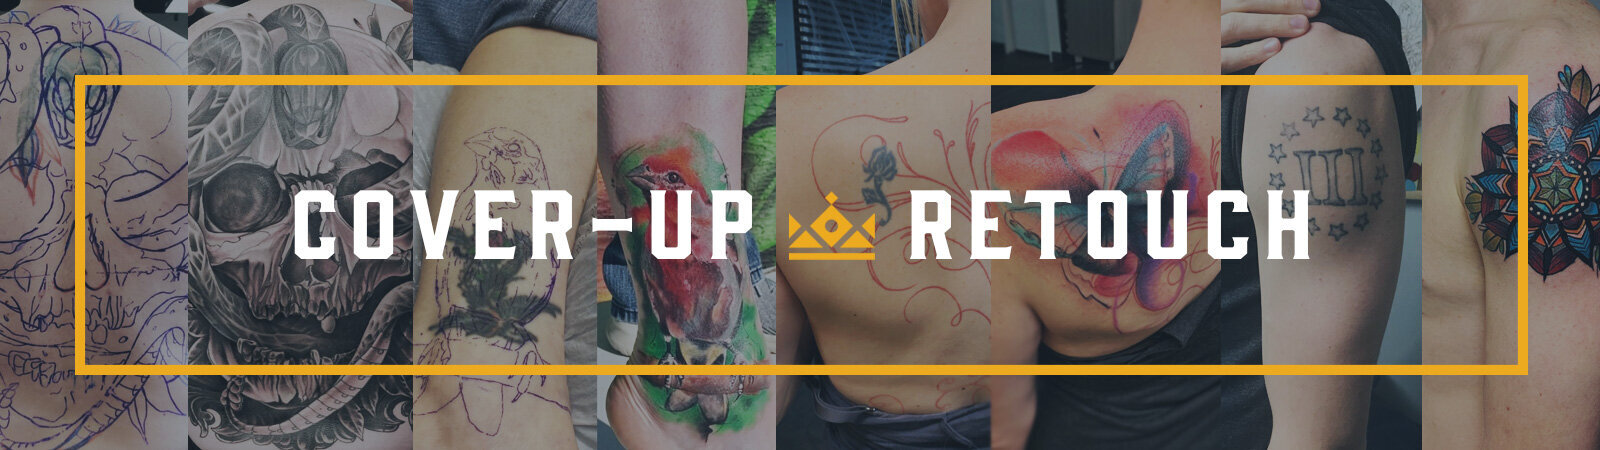 Coverup Tattoo Ideas: Finding Inspiration Through Meaning & Design —  Certified Tattoo Studios